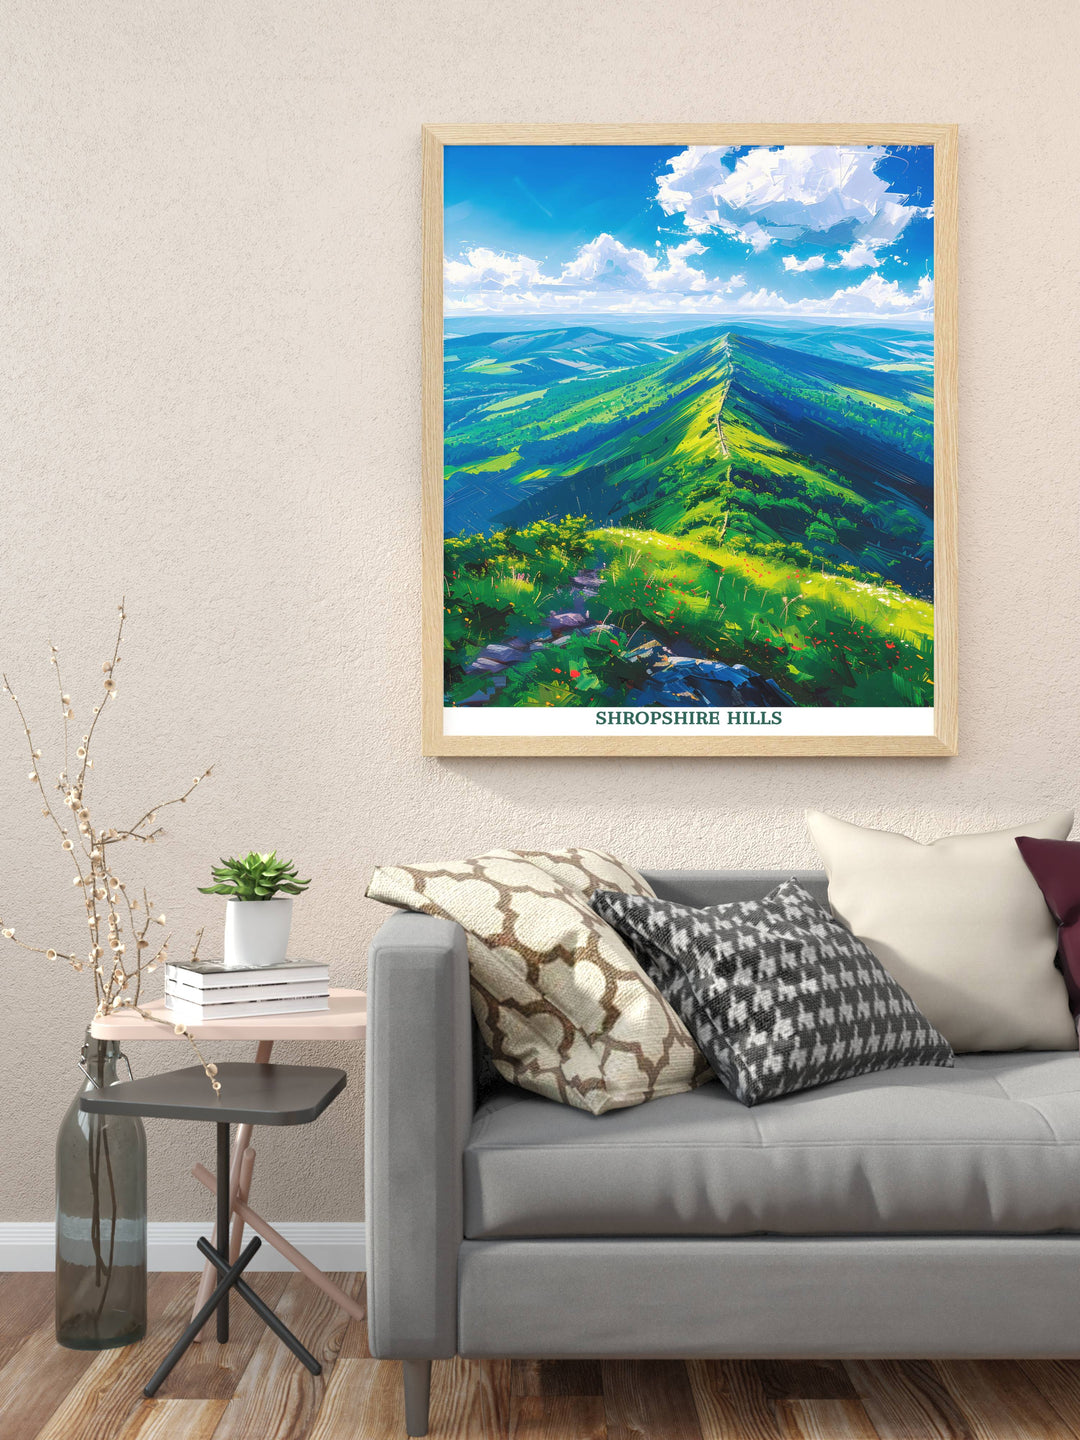 Shropshire Hills Travel Print Wall Art - The Long Mynd - Shropshire Hills Gift Art - Area of Outstanding Natural Beauty